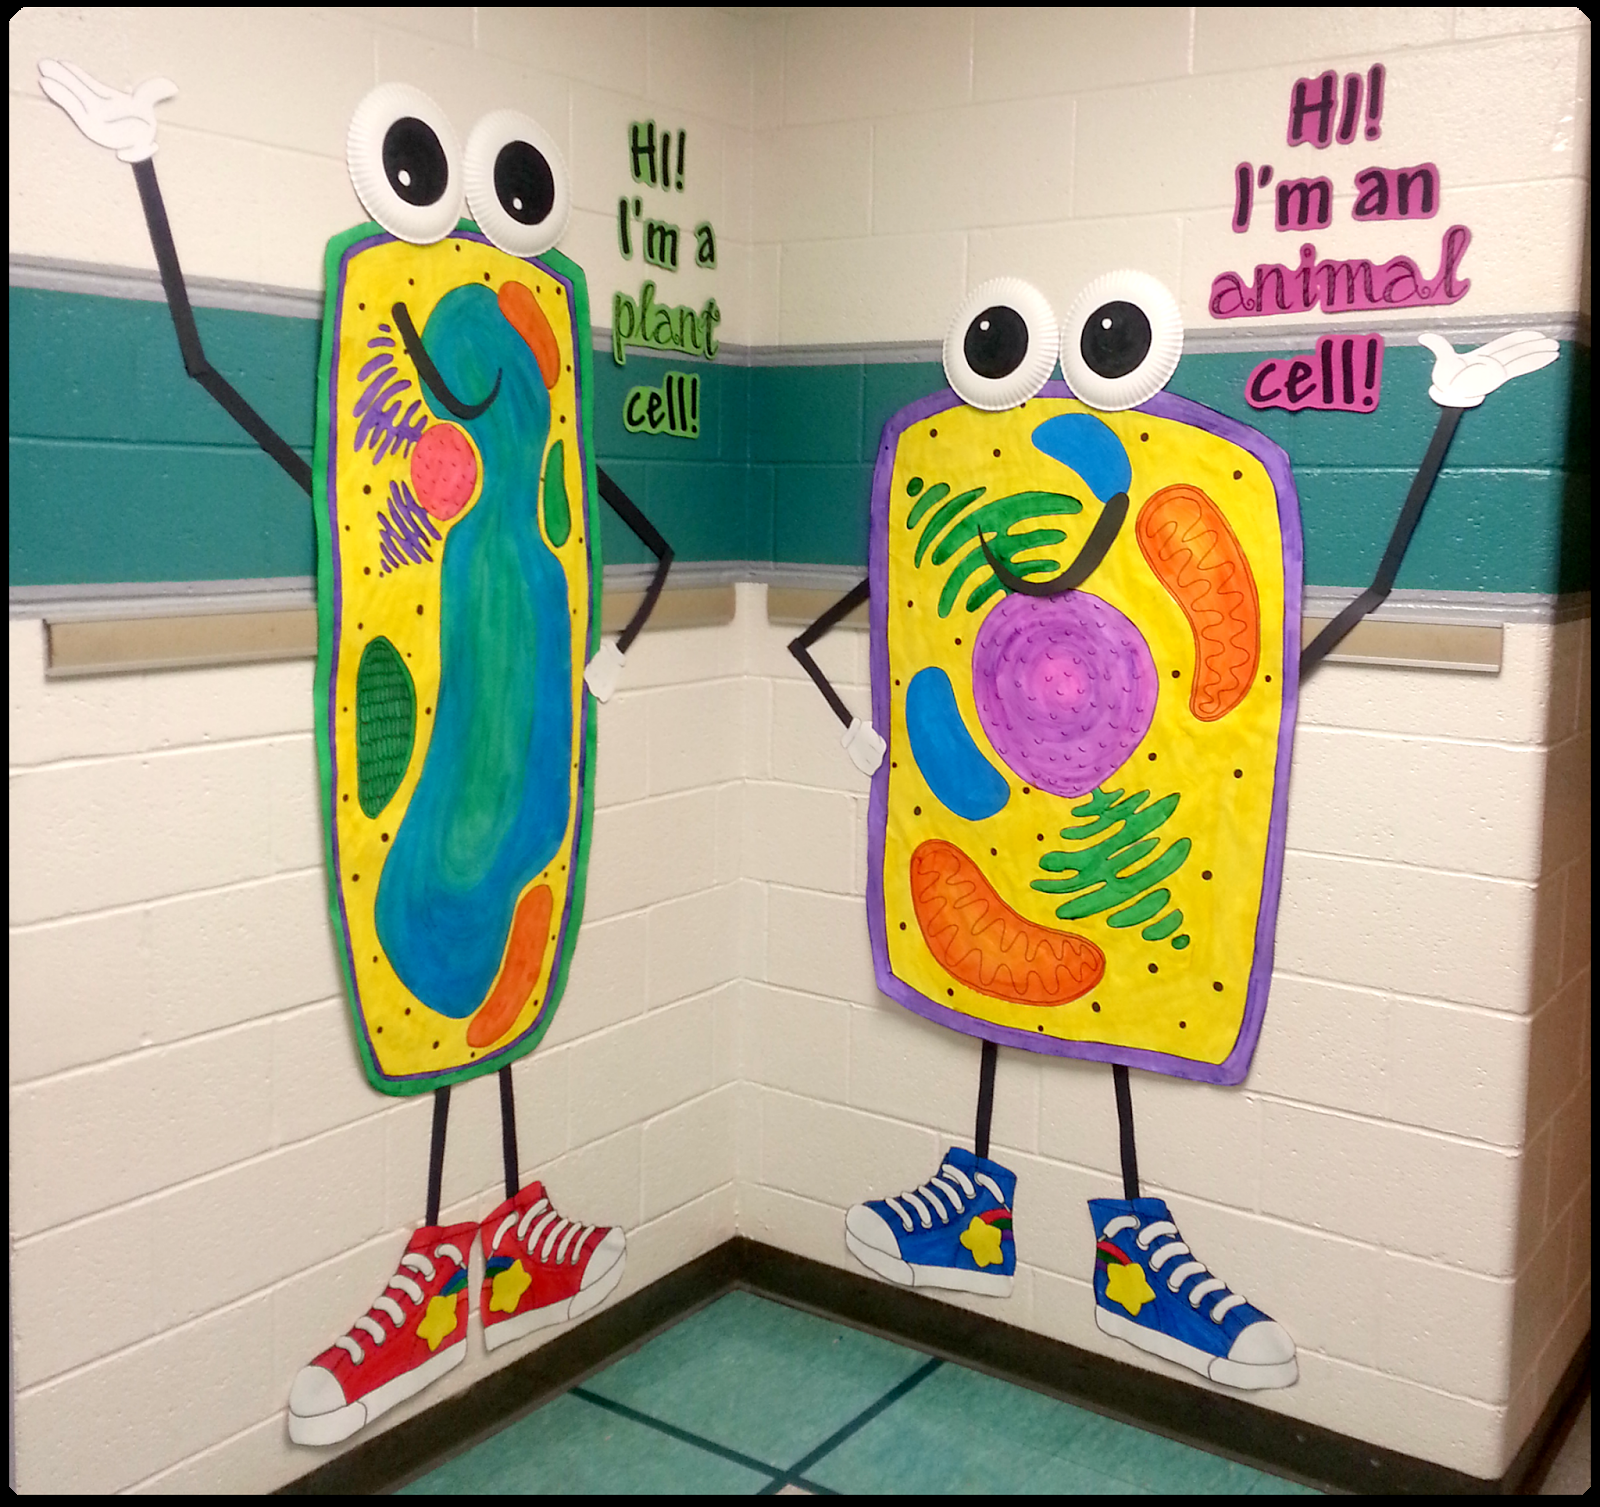 How cute are these cells?  Keep clicking on the picture to take a look at these adorable cells, a tepee, and some other fun